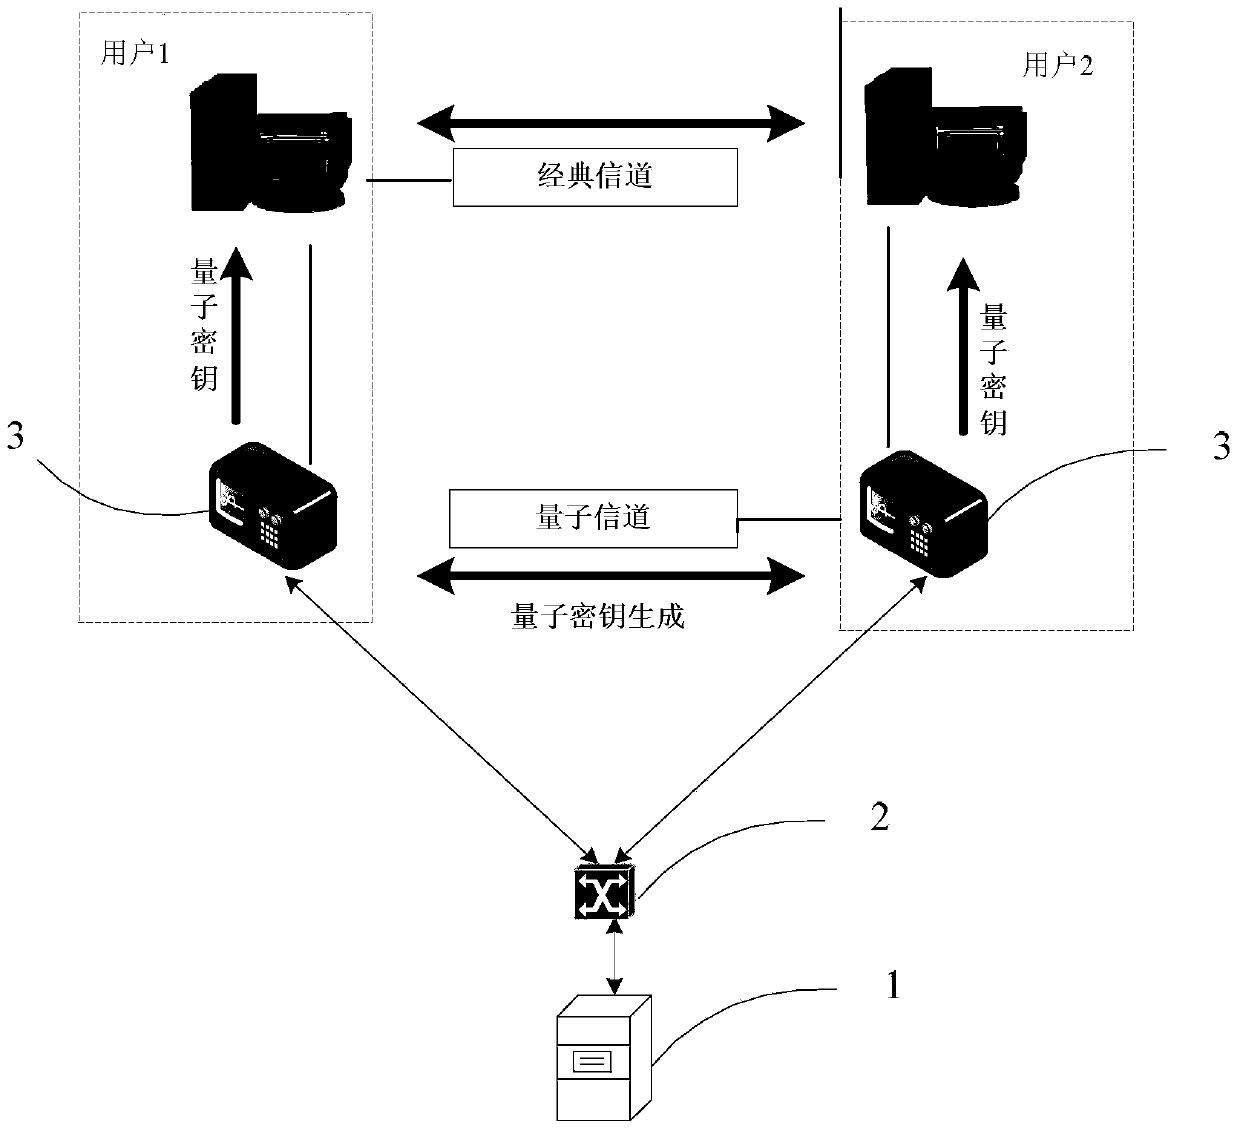 Electric power security communication network based on quantum key distribution technology